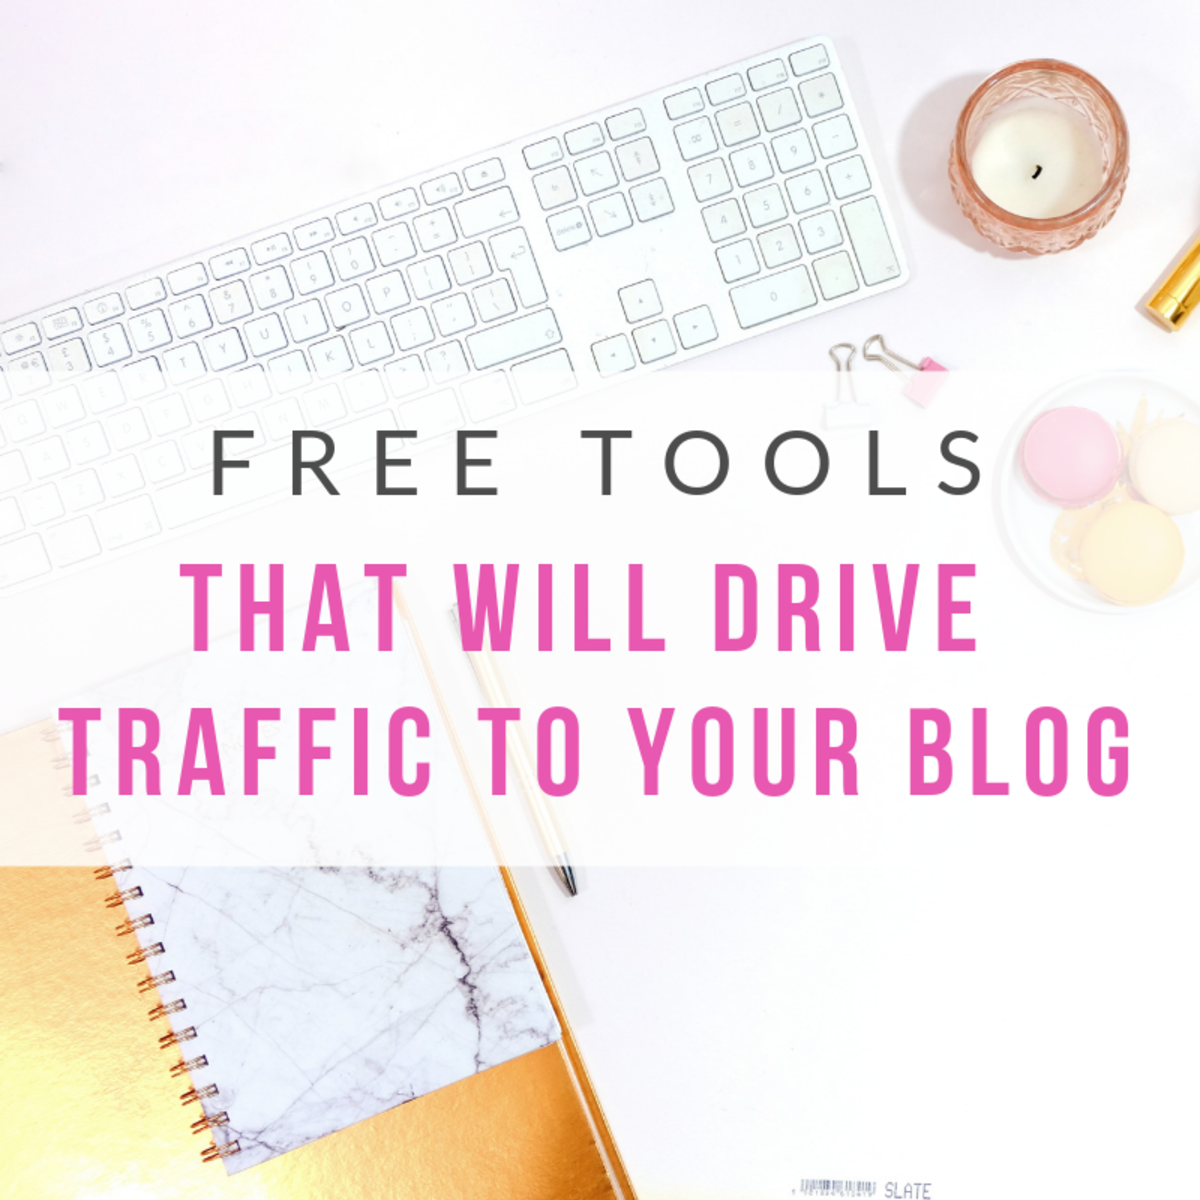 These 5 free tools can help you dramatically increase organic traffic to your website and they don't require you to have a massive social media following!